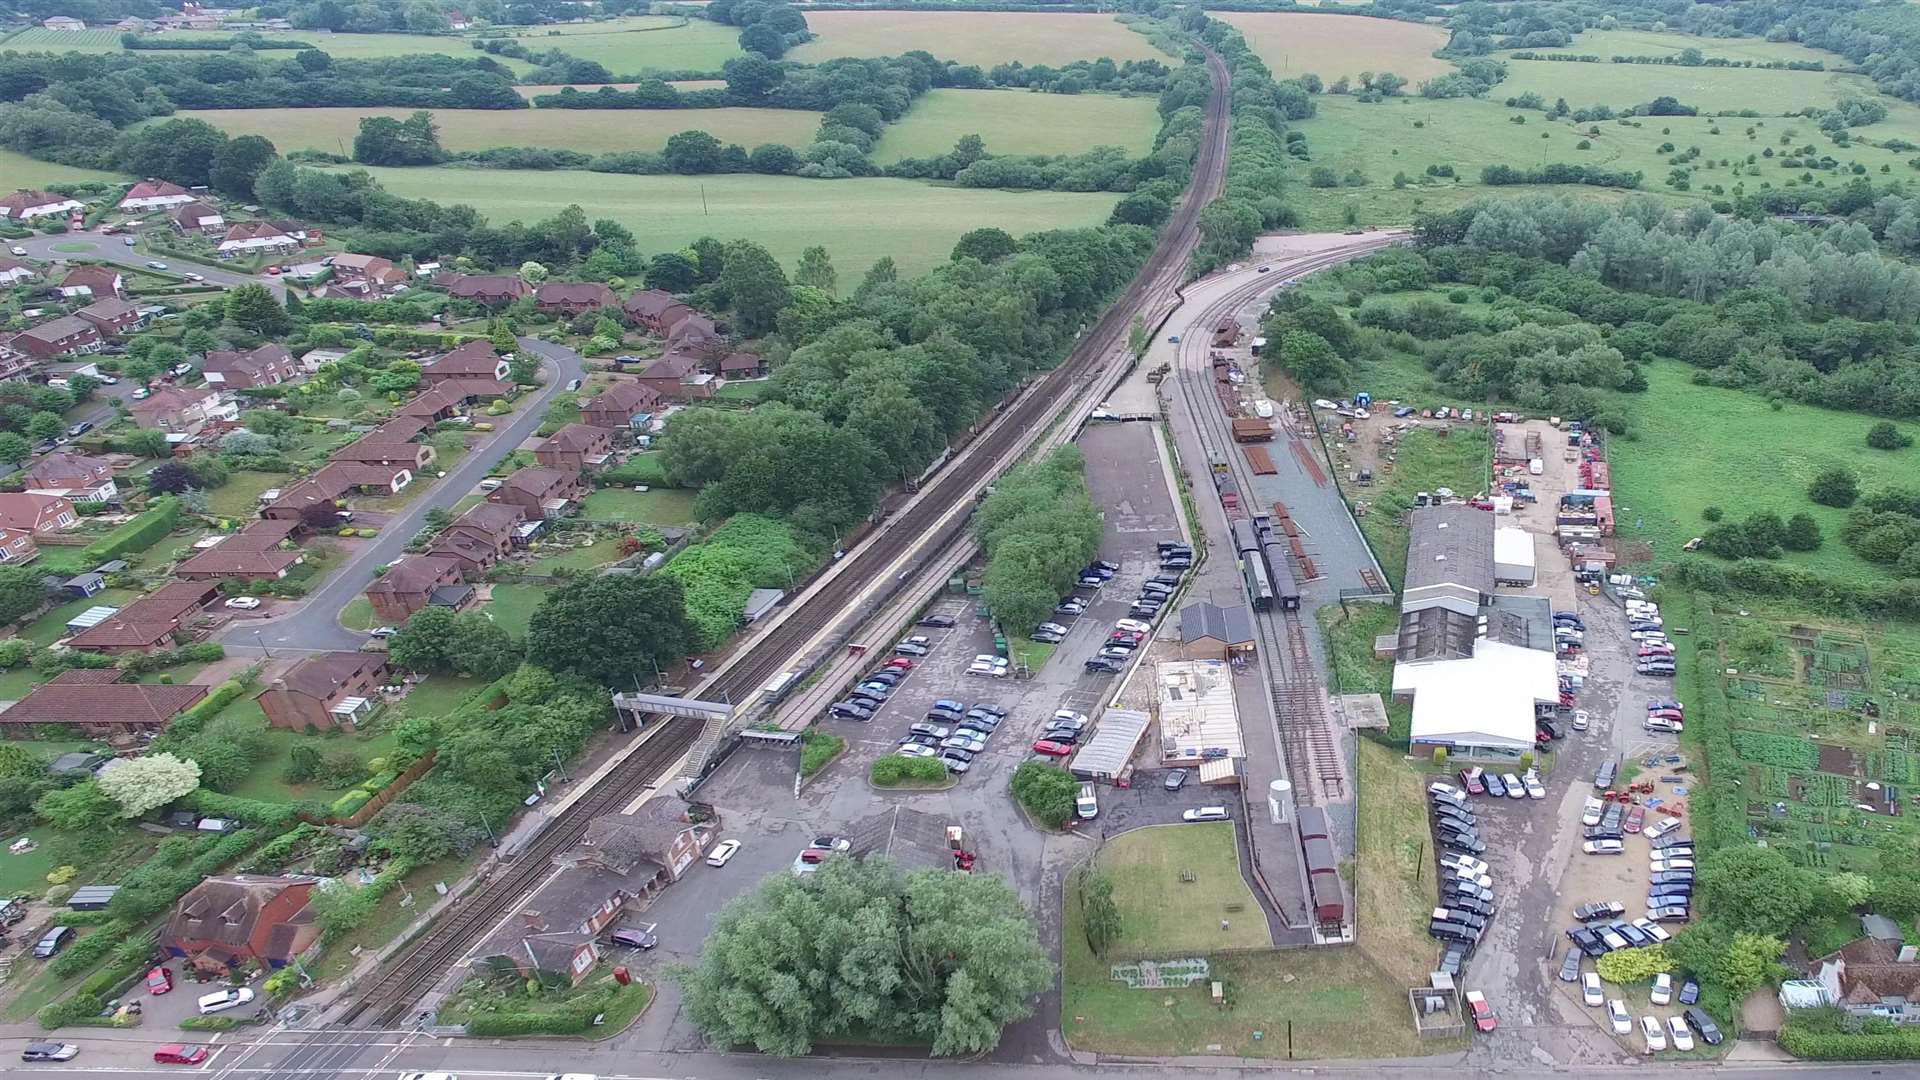 Robertsbridge with the mainline station to the left and the RVR development on the right